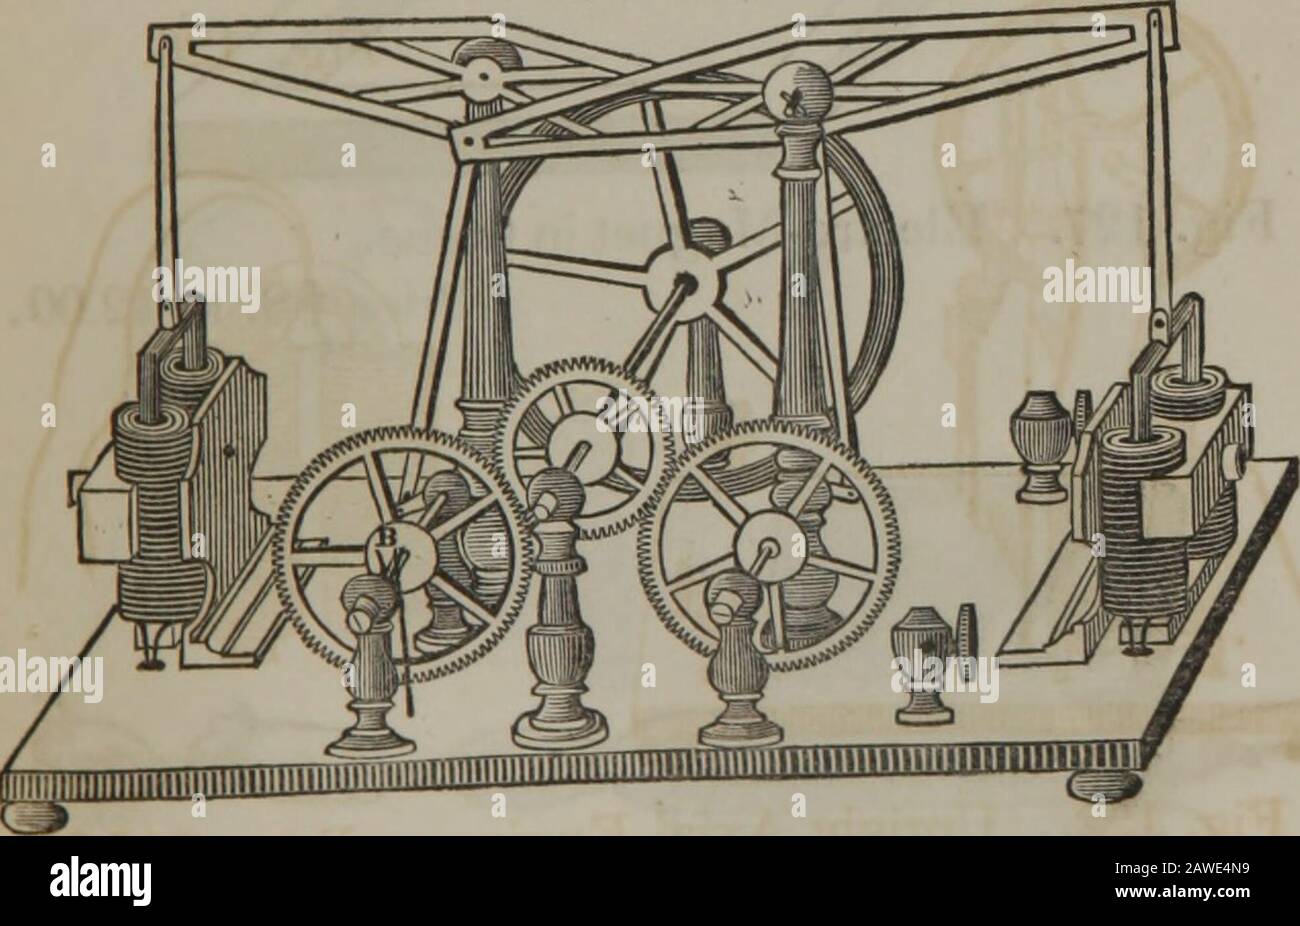 Catalogue of apparatus, to illustrate magnetism, galvanism, electrodynamics, electromagnetism, magno-electricity . Fig. 121. Double Axial Bell Engine. Fig. 124. Price $8.00.. pf^iiTiPirrmTTiTTmTiTmTnTinMiiiminniJiuFicr 1^4 Double Beam Axial Engine Price $15. to 18.00. 26 DAVIS S CATALOGUE Fig. 127. Stock Photo